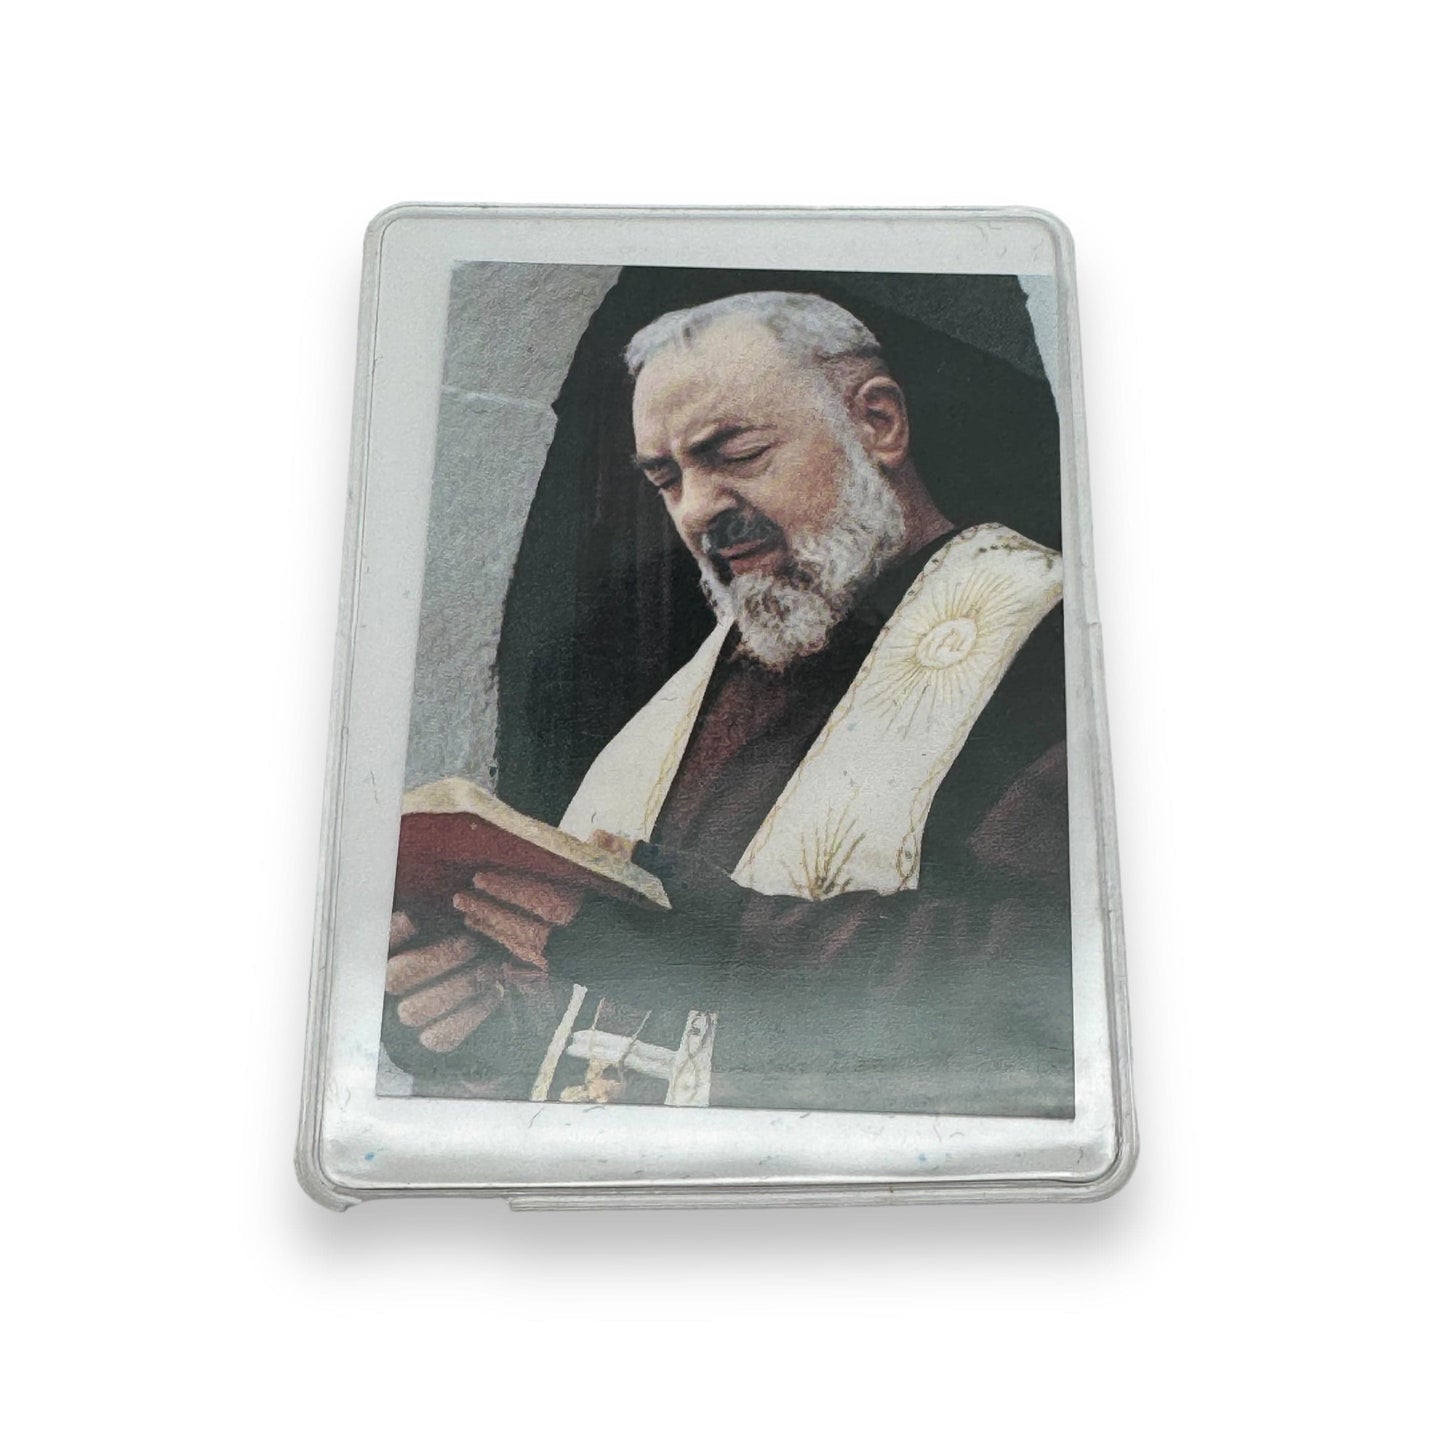 Catholically Holy Card St. Padre Pio Vintage Holy Card - Relic Of St. Father Pio Of Pietrelecina